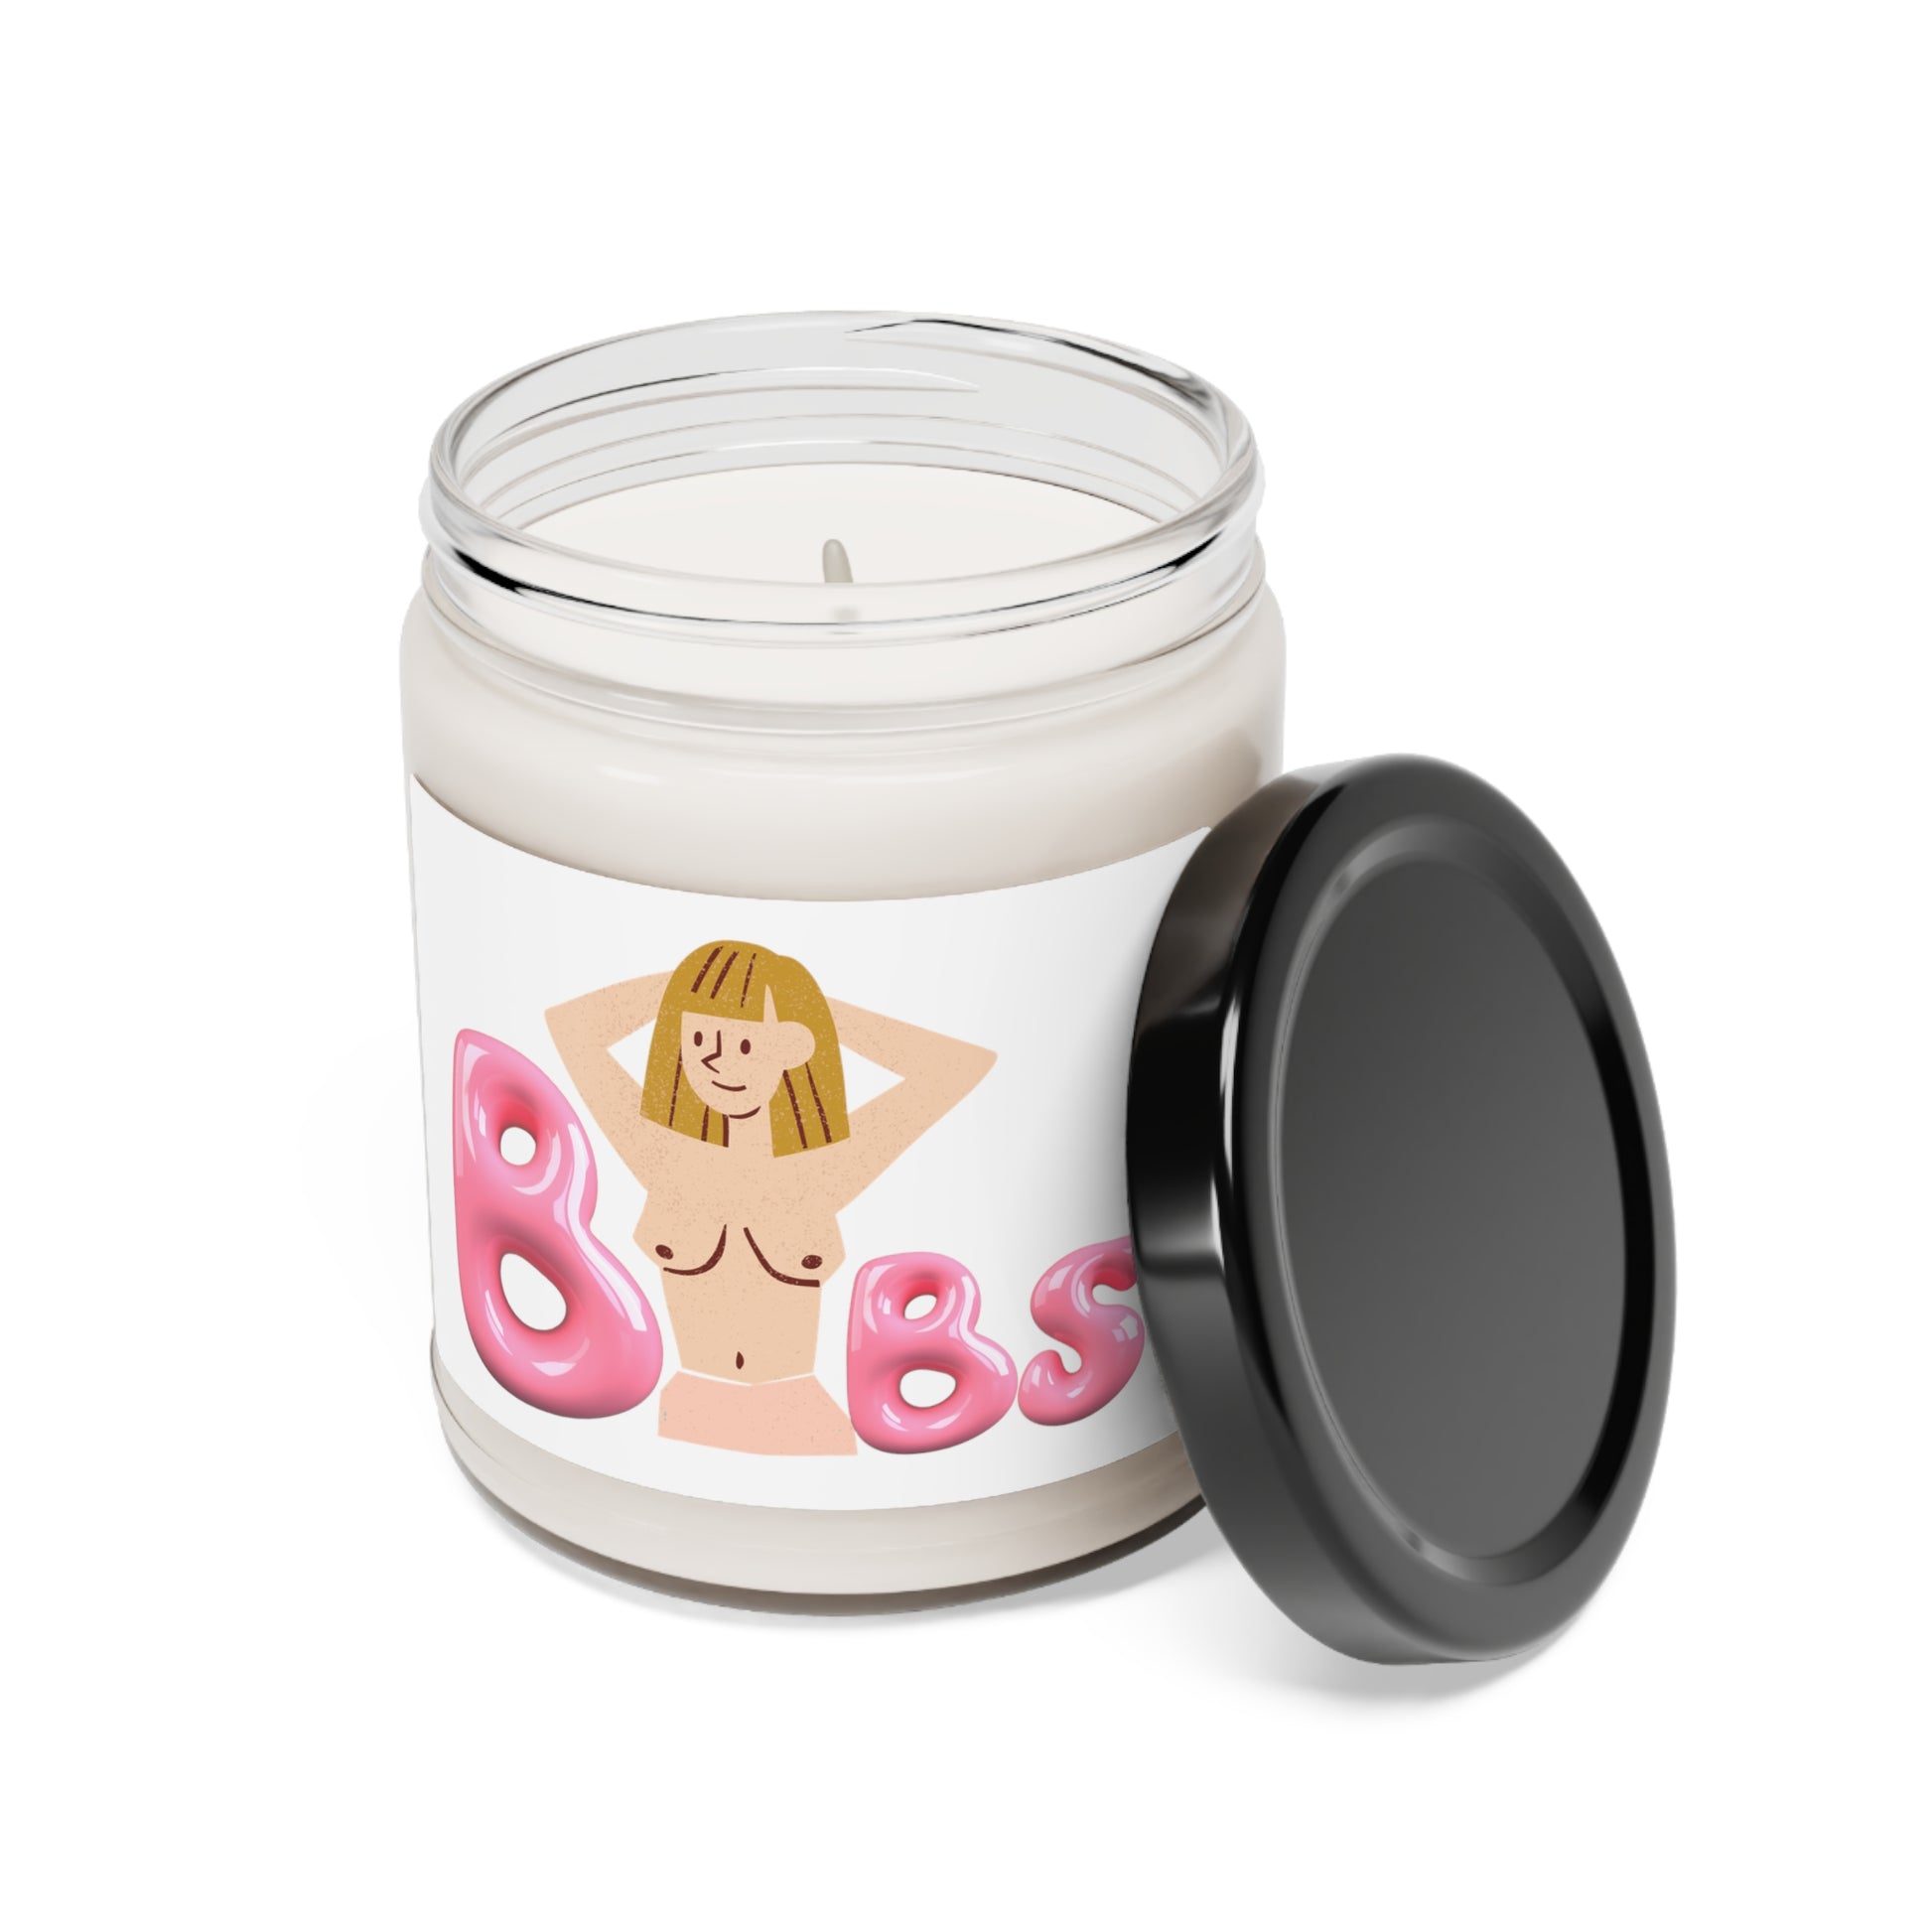 Juucie | "Buubs" Scented Soy Candle, 9oz - Juucie